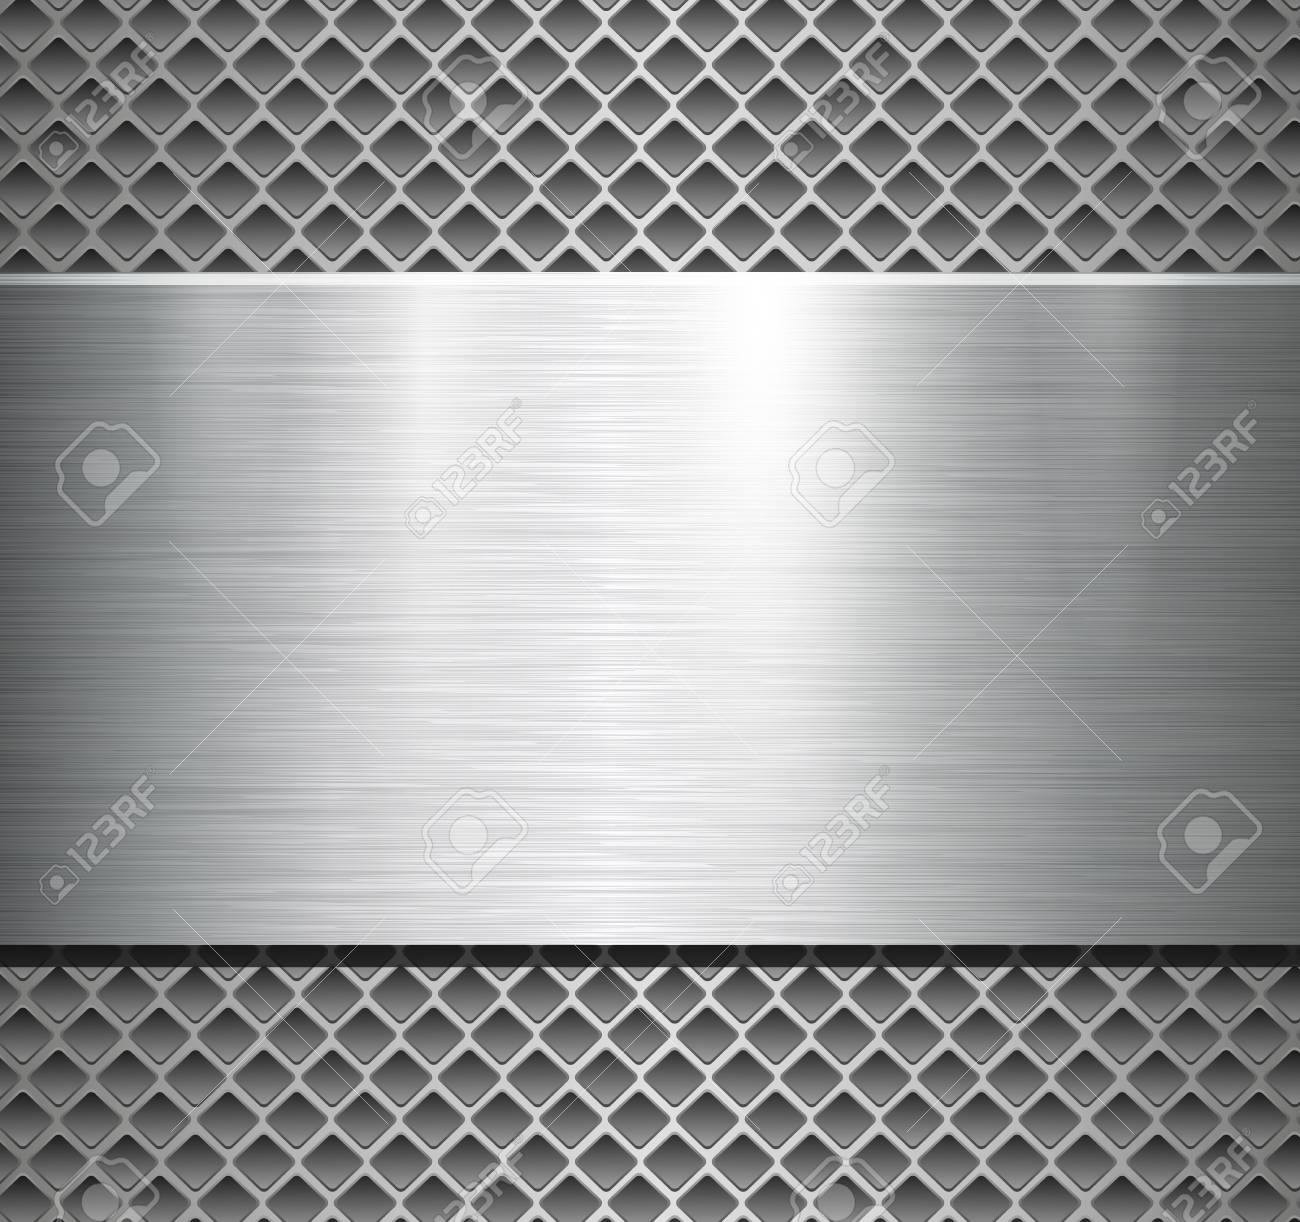 Metallic Background Silver Polished Steel Texture Over Perforated